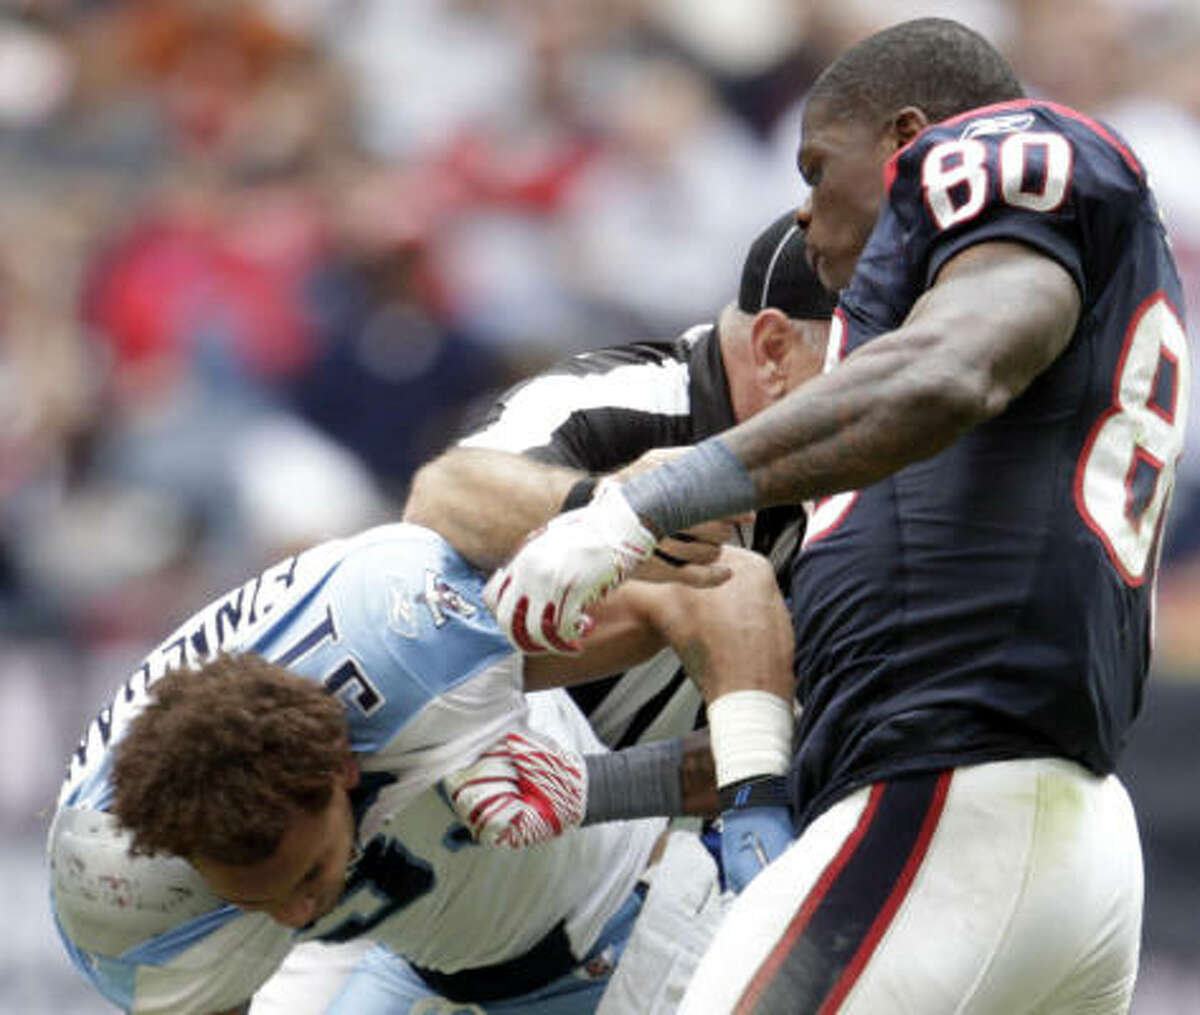 Nov. 28: Texans 20, Titans 0 Texans wide receiver Andre Johnson (80) fights with Titans cornerback Cortland Finnegan during the fourth quarter of Sunday's game at Reliant Stadium. The players ripped off each other's helmet and were ejected from the game.